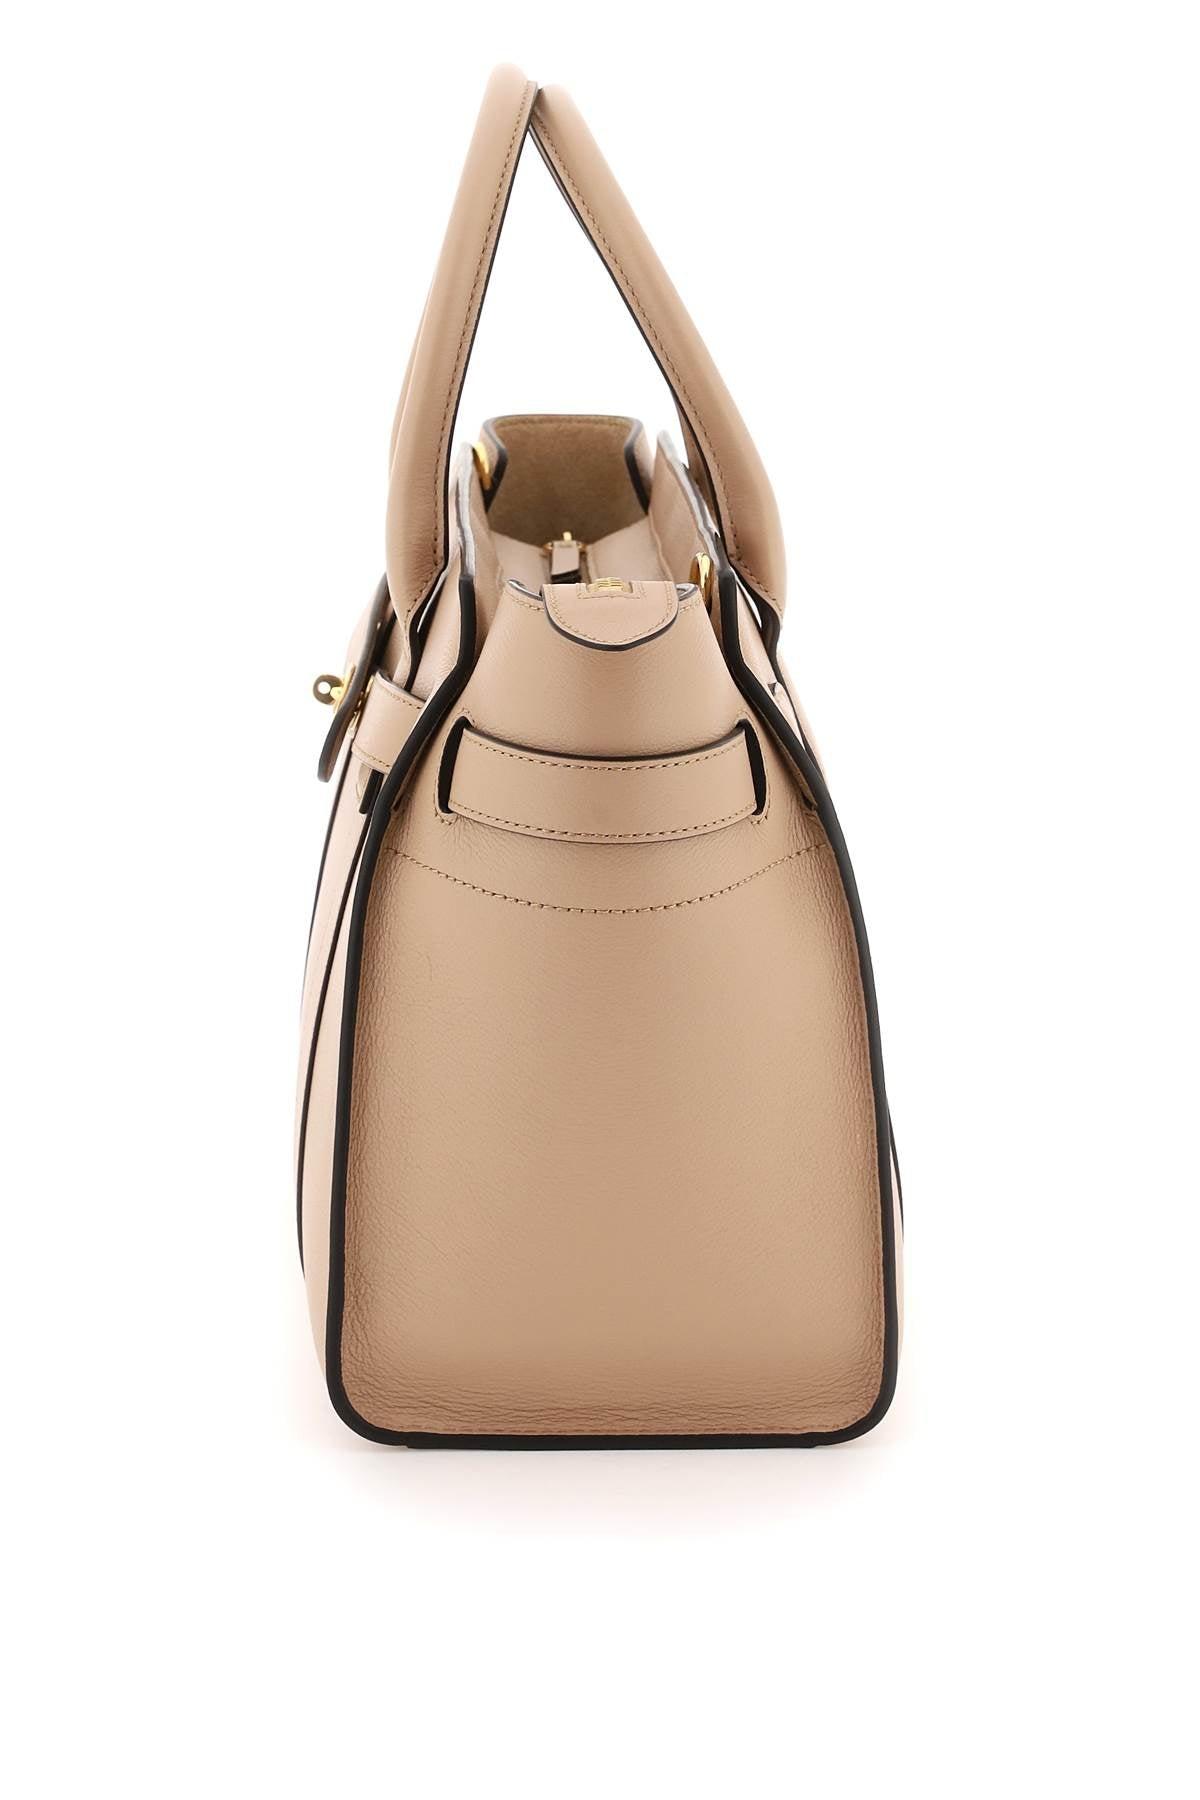 Mulberry Mini Zipped Bayswater Bag in Natural | Lyst